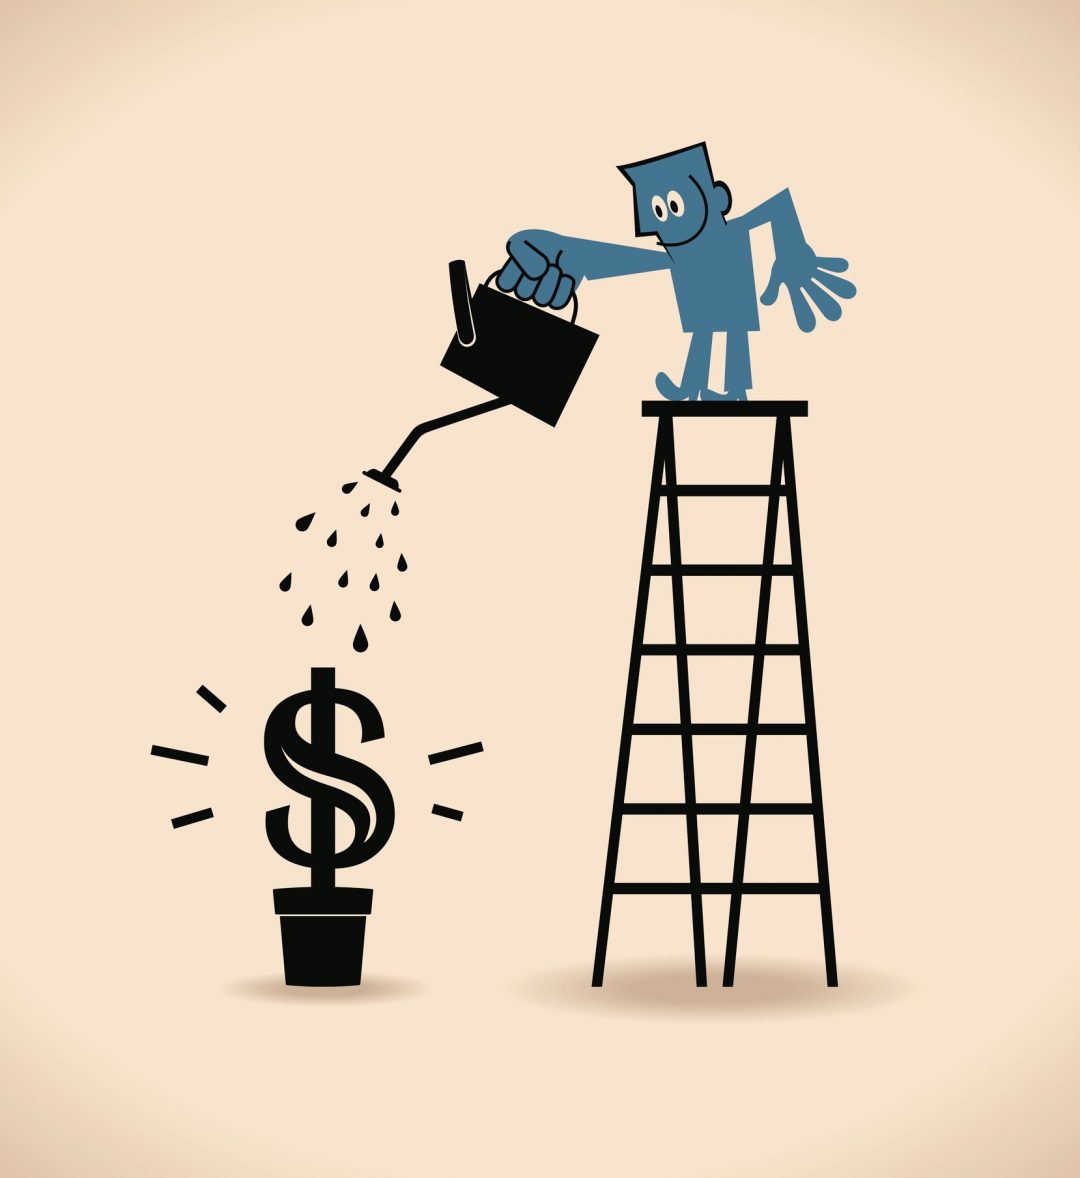 Businessman on top of ladder, watering money plant